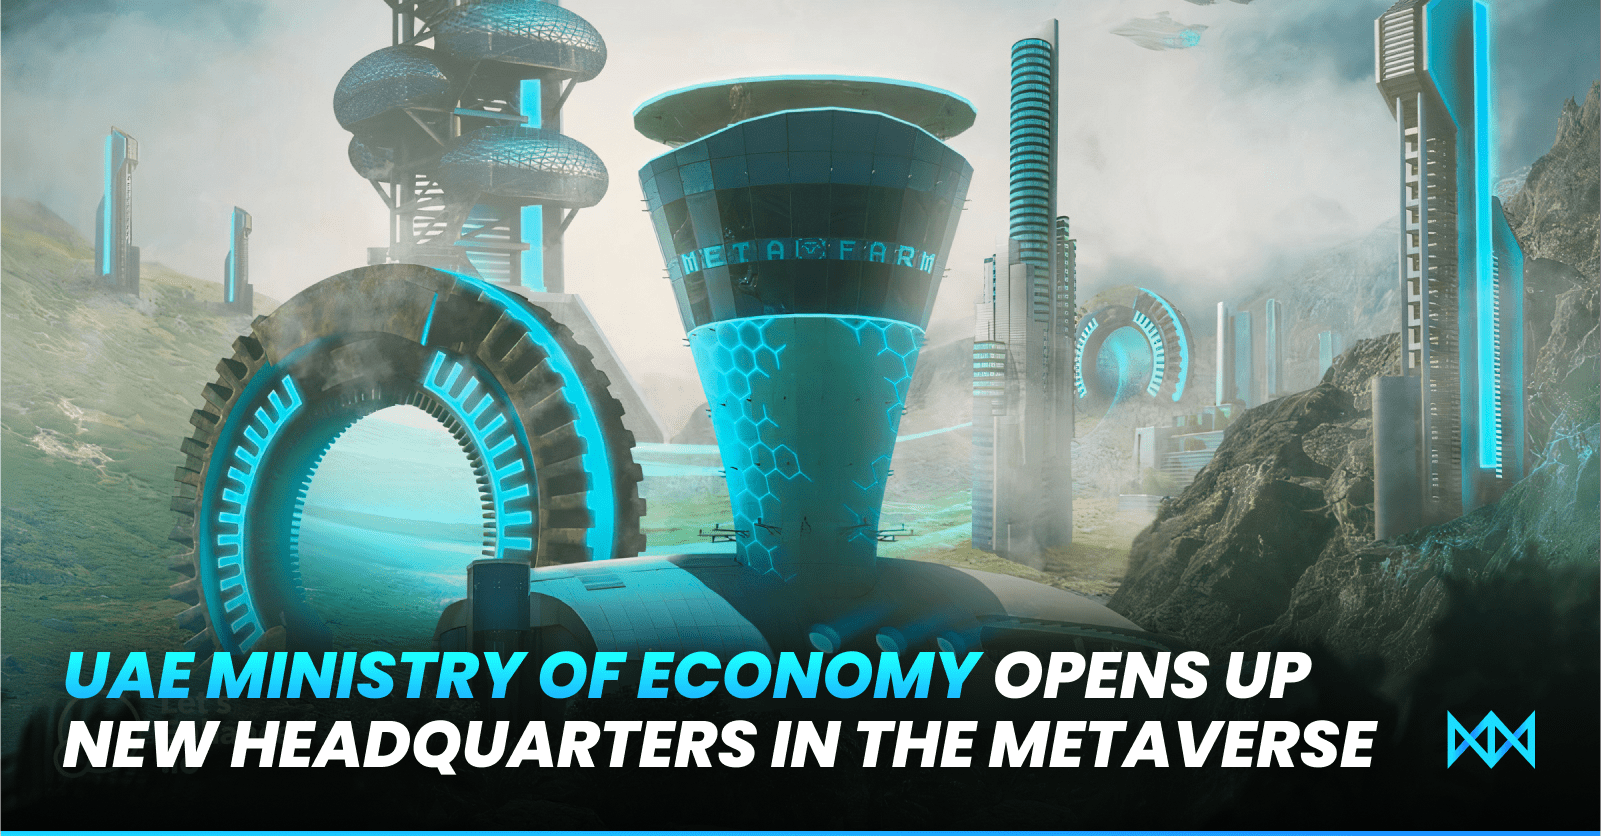 Metaverse headquarters open for UAE Ministry of Economy